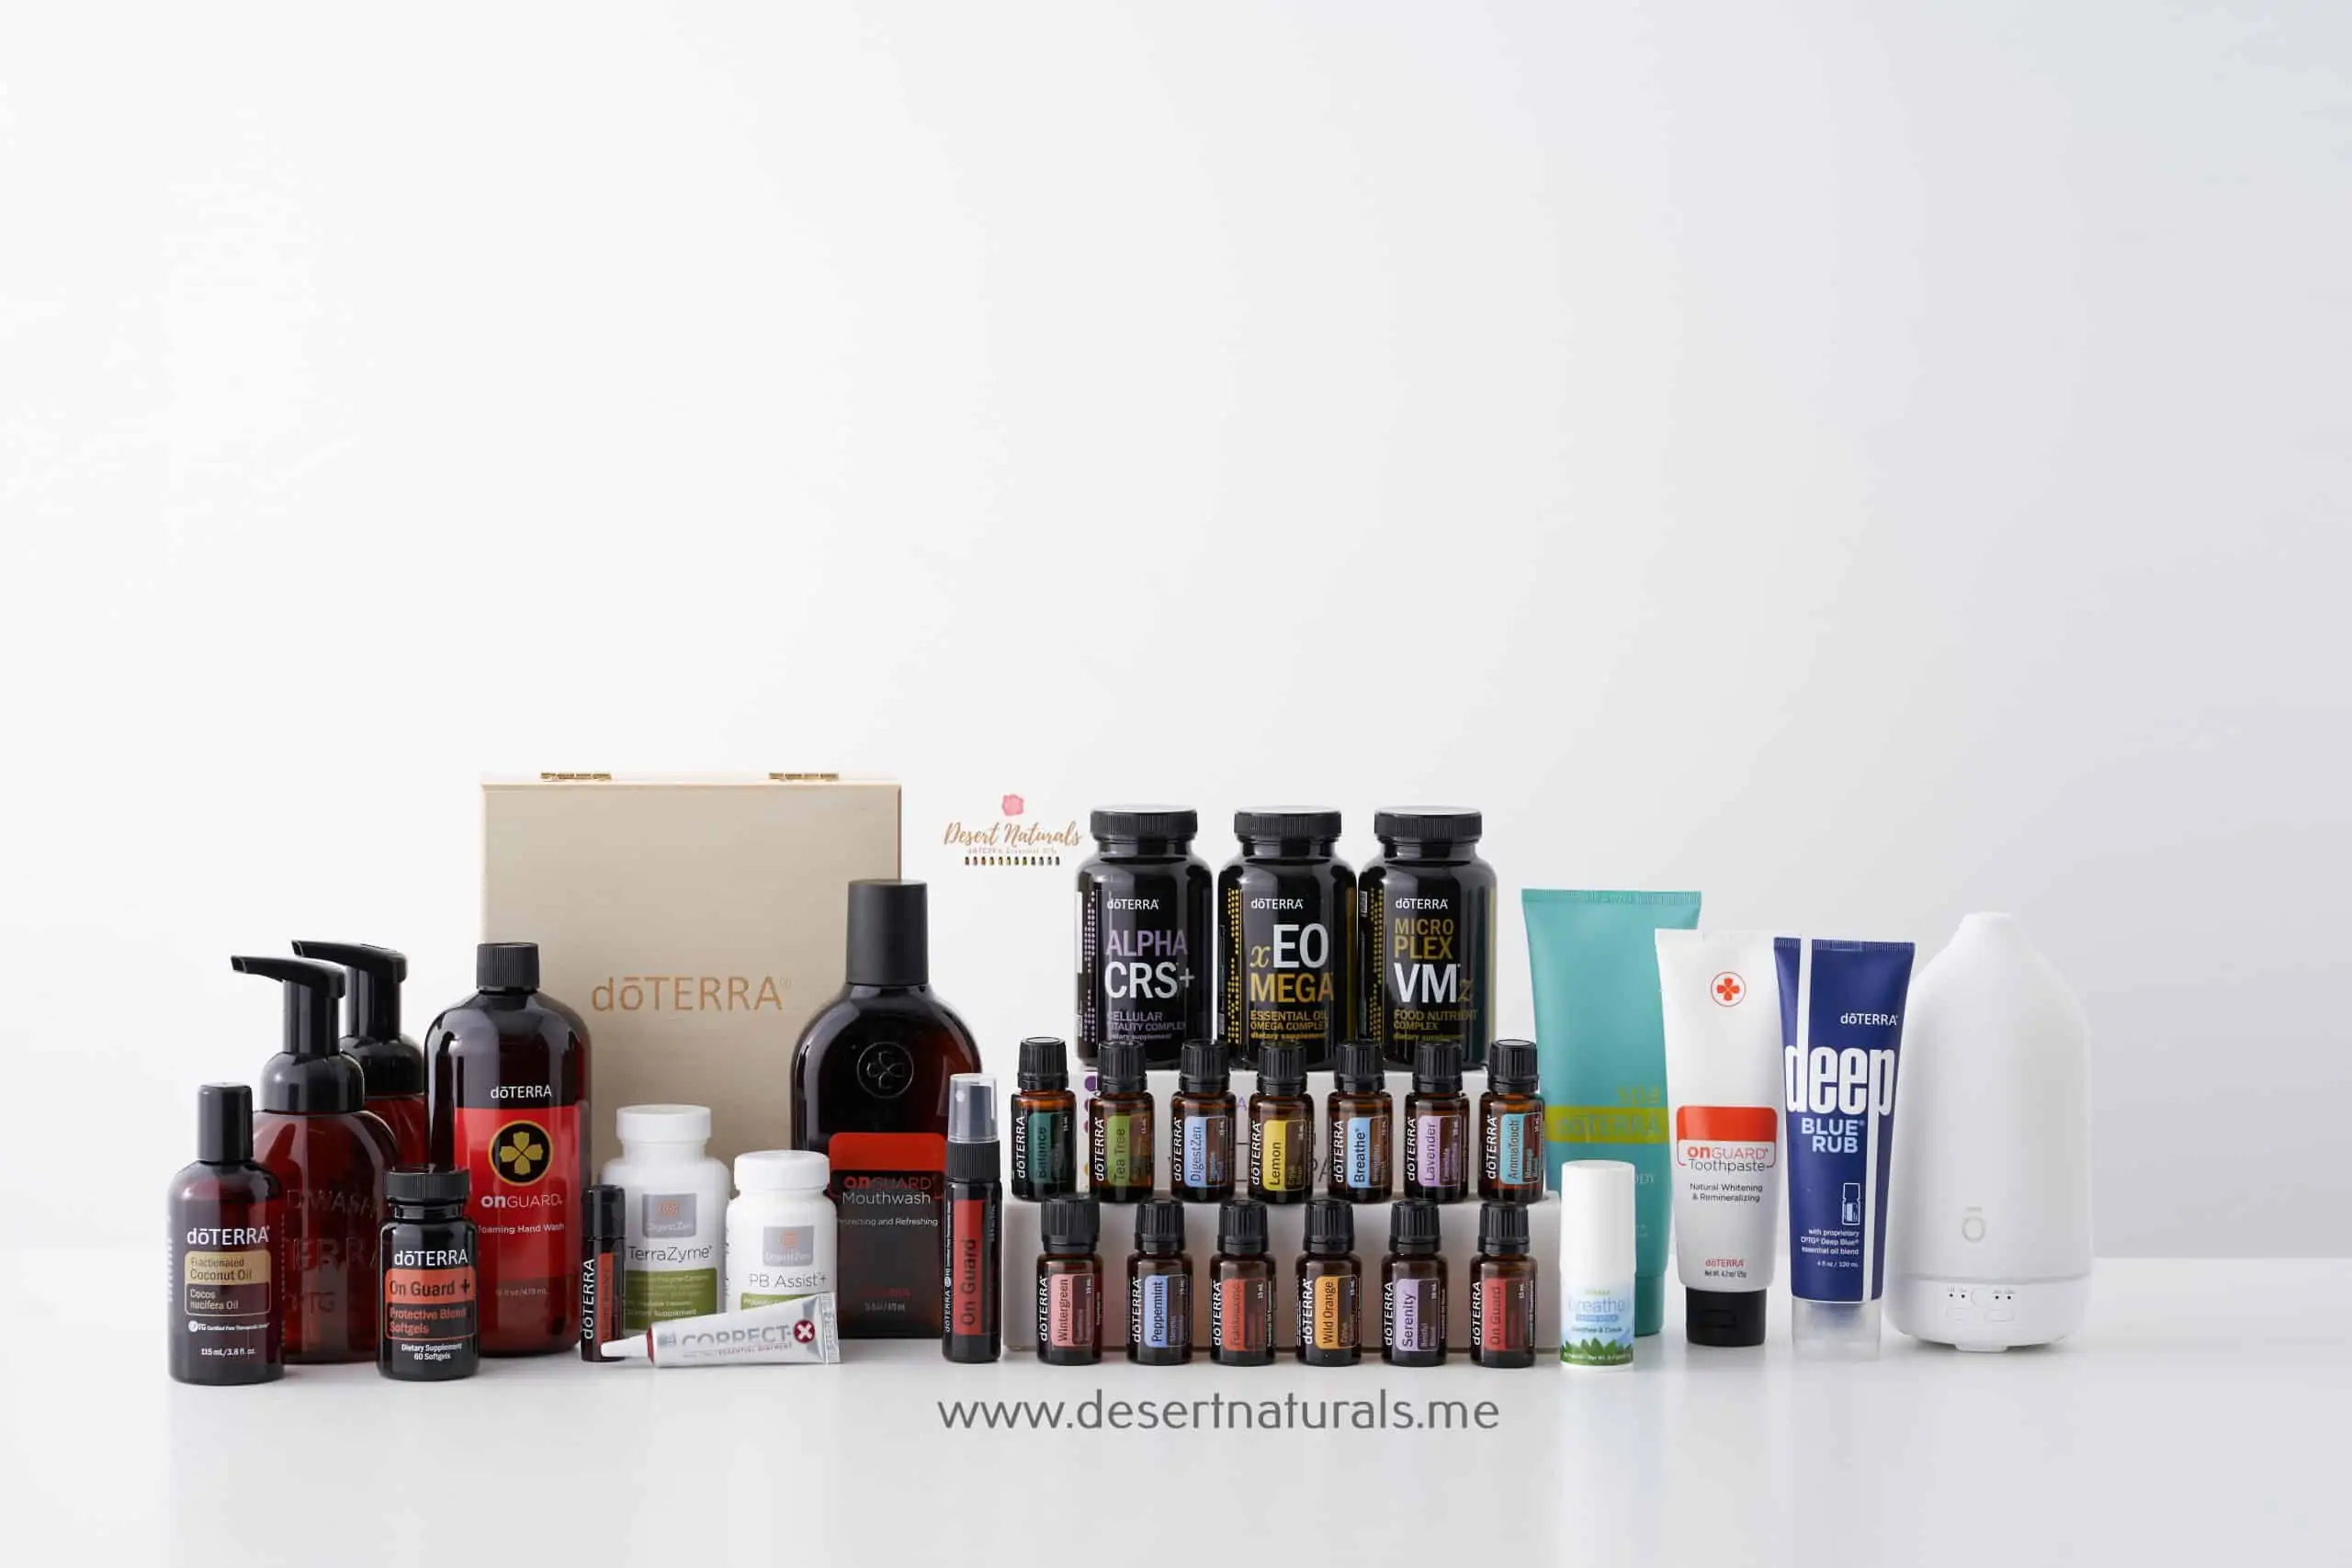 doterra natural solutions kit scaled